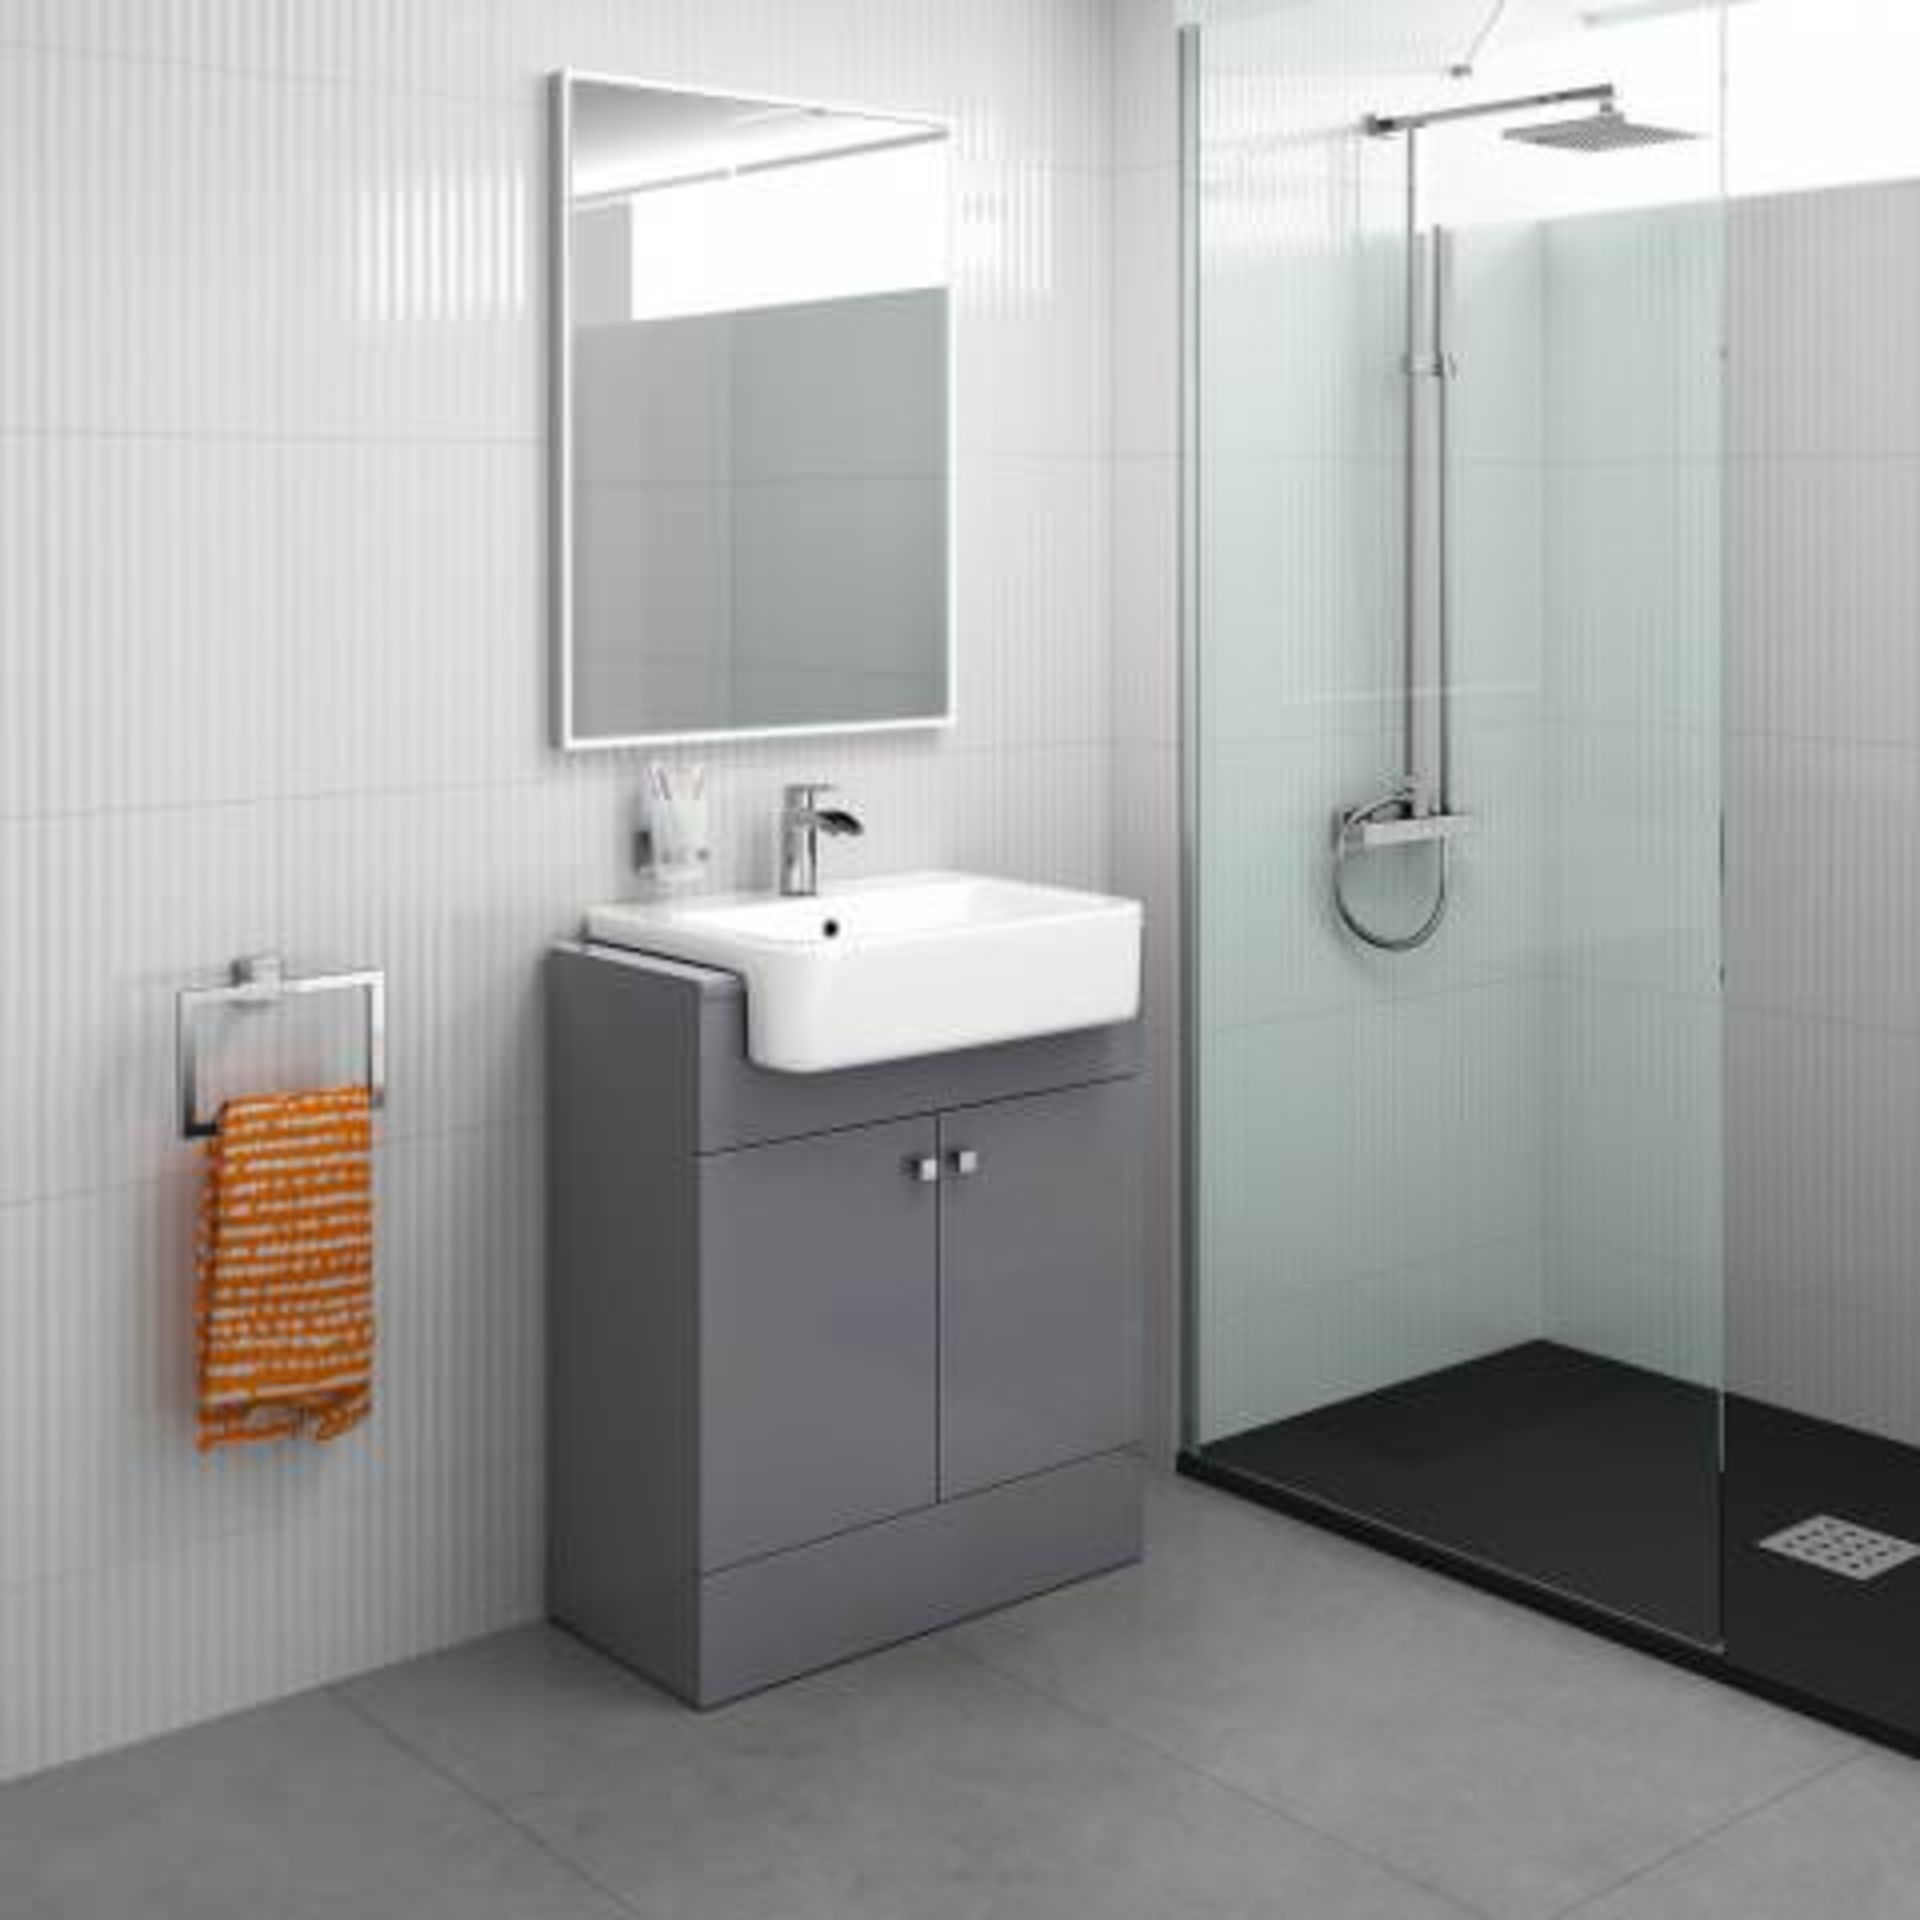 Brand New 660mm Harper Gloss Grey Basin Vanity Unit - Floor Standing. RRP £749.99. COMES COMPLETE WI - Image 2 of 3